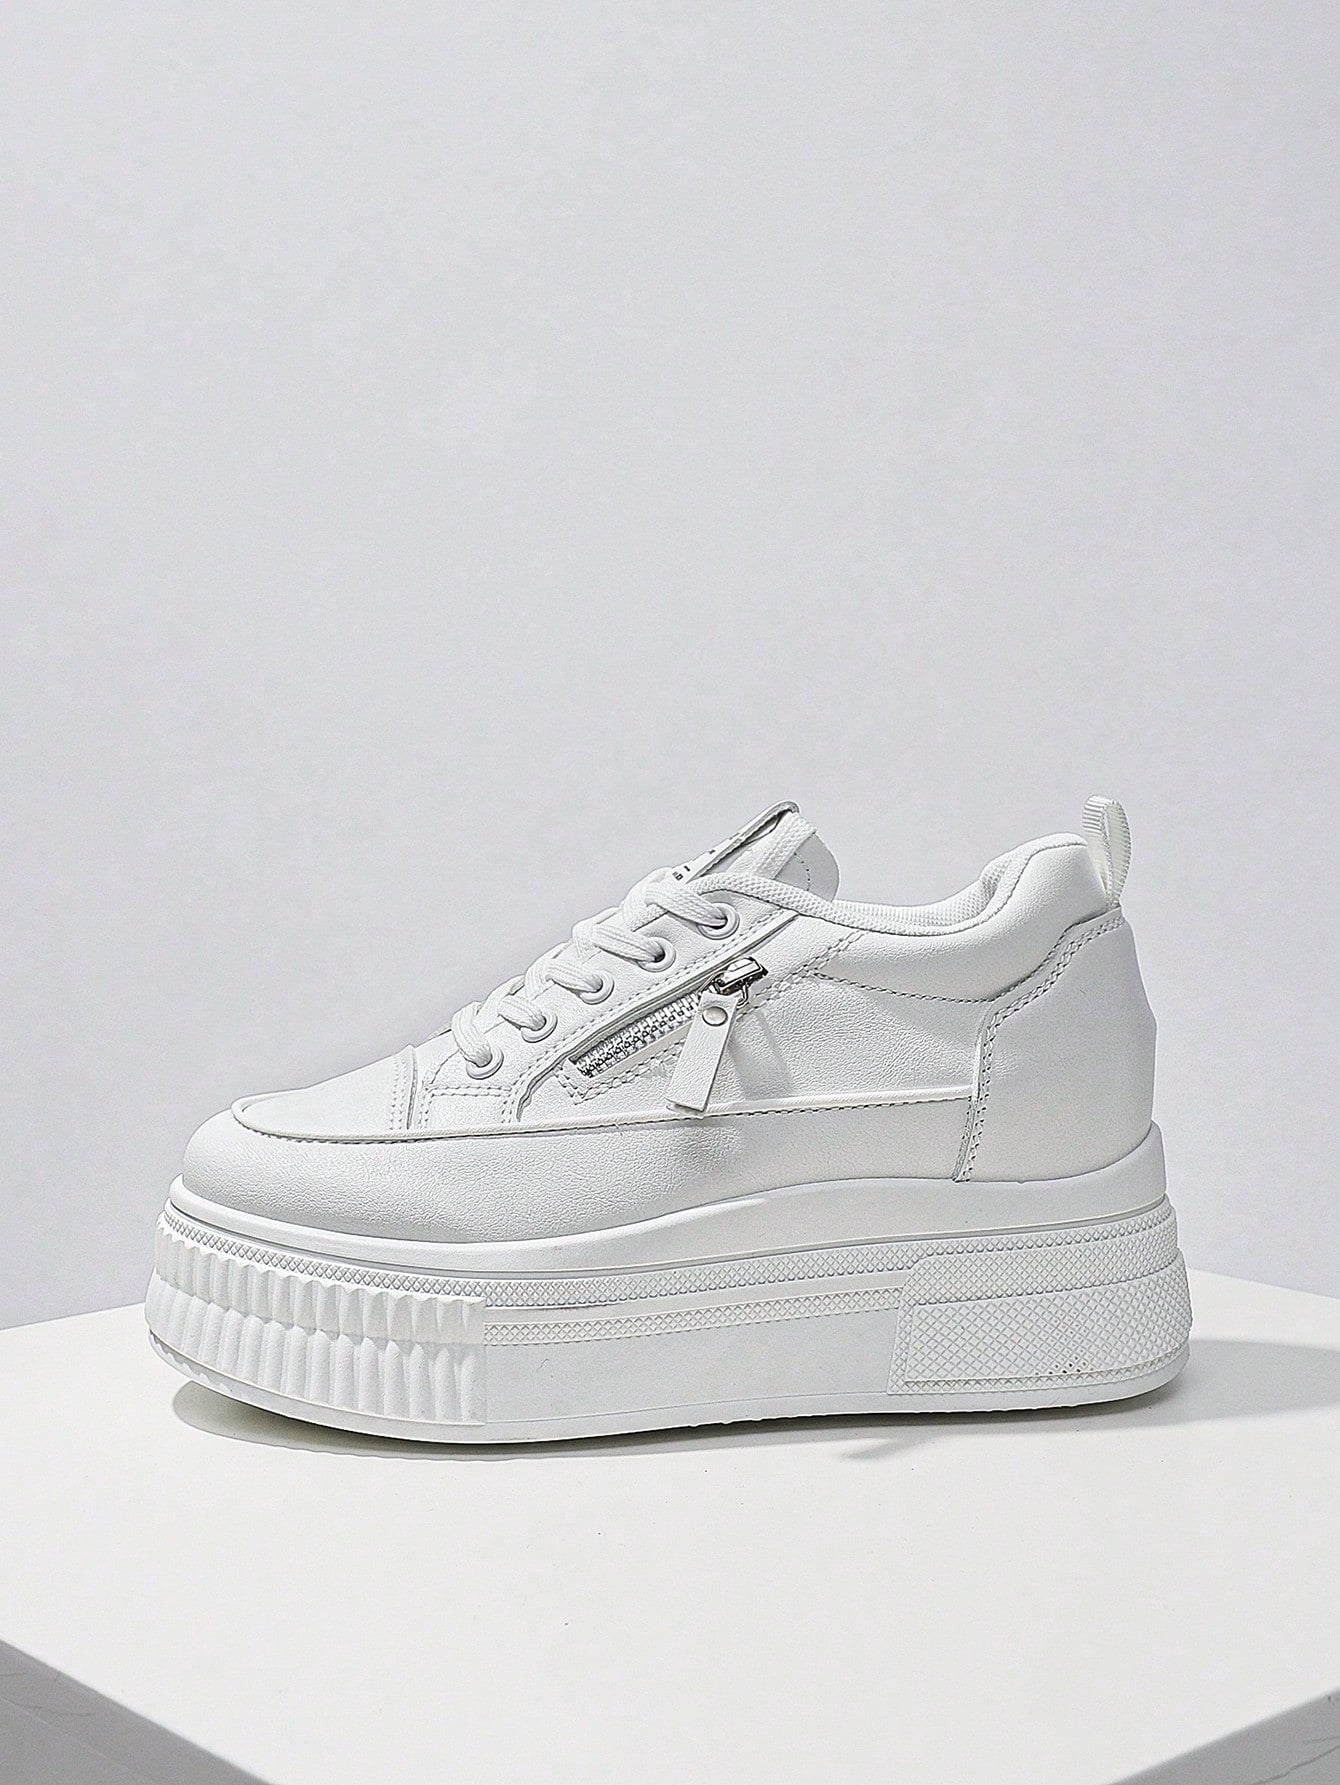 New Style Casual Shoes For Women, Ladies Platform Shoes With  Zipper, White Shoes, Outdoor Comfortable Sneakers, Internal Increase 5cm, Party Shoes, Suitable For Short Women-White-6